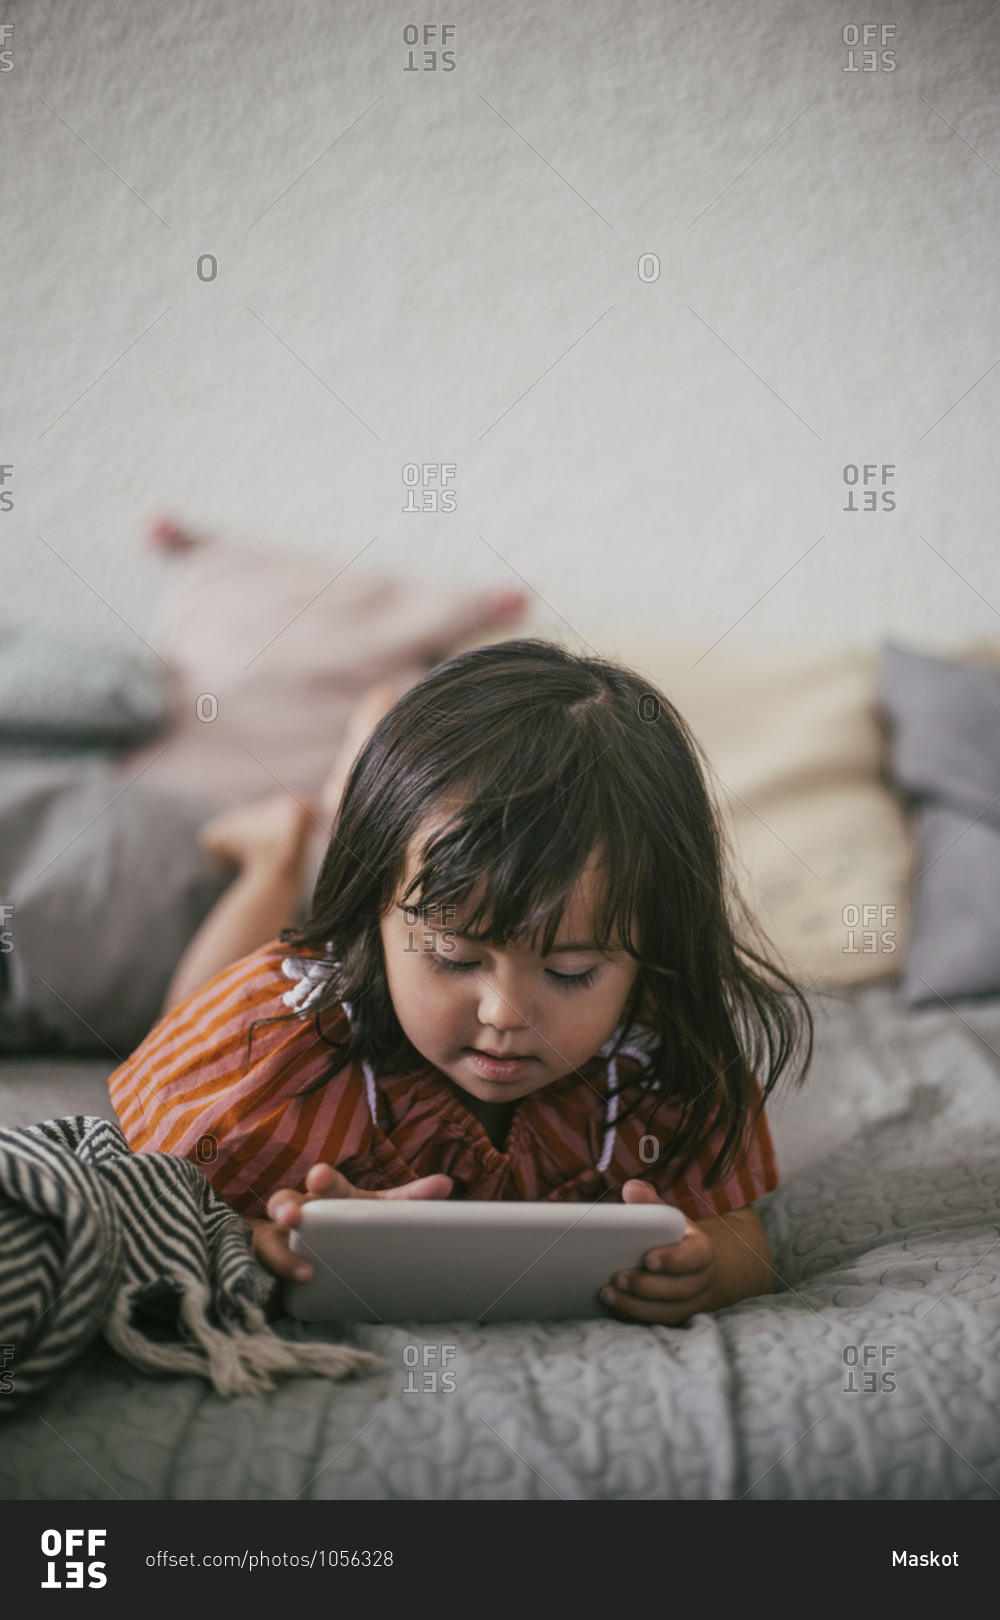 Down syndrome girl using digital tablet while lying on sofa at home